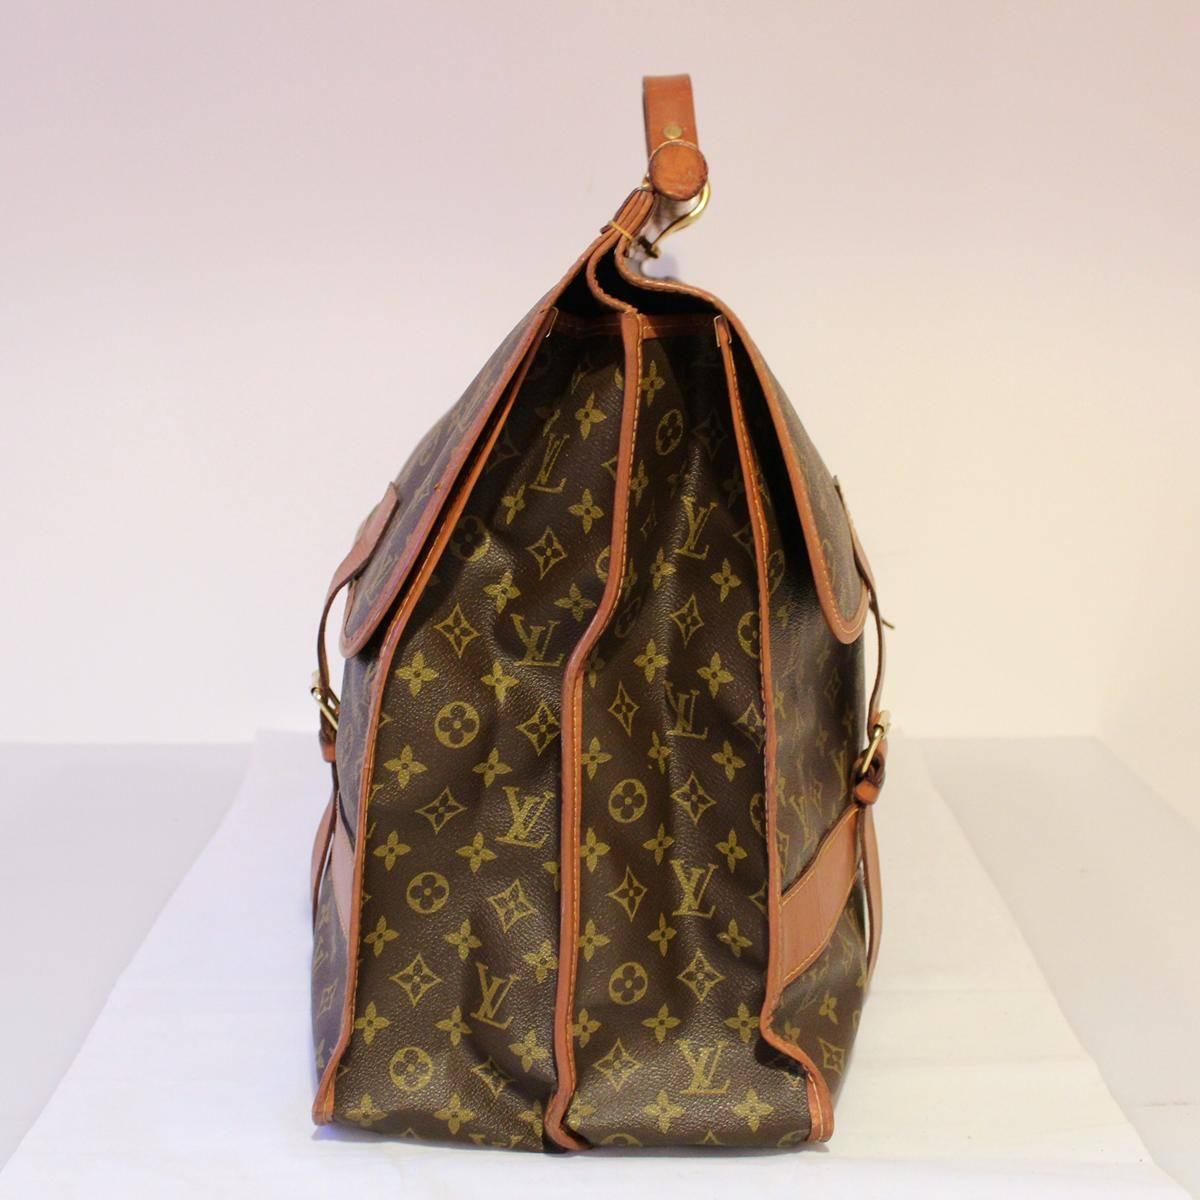 Fantastic  Louis Vuitton piece !
Perfect for collectors
Vintage from the 70's
Monogram leather 
Single handle
Double buckle on each side
Two large compartments
Large zip pocket in one of the two compartments
Cm 64 x 45 x 23 (25.1 x 17.7 x 9